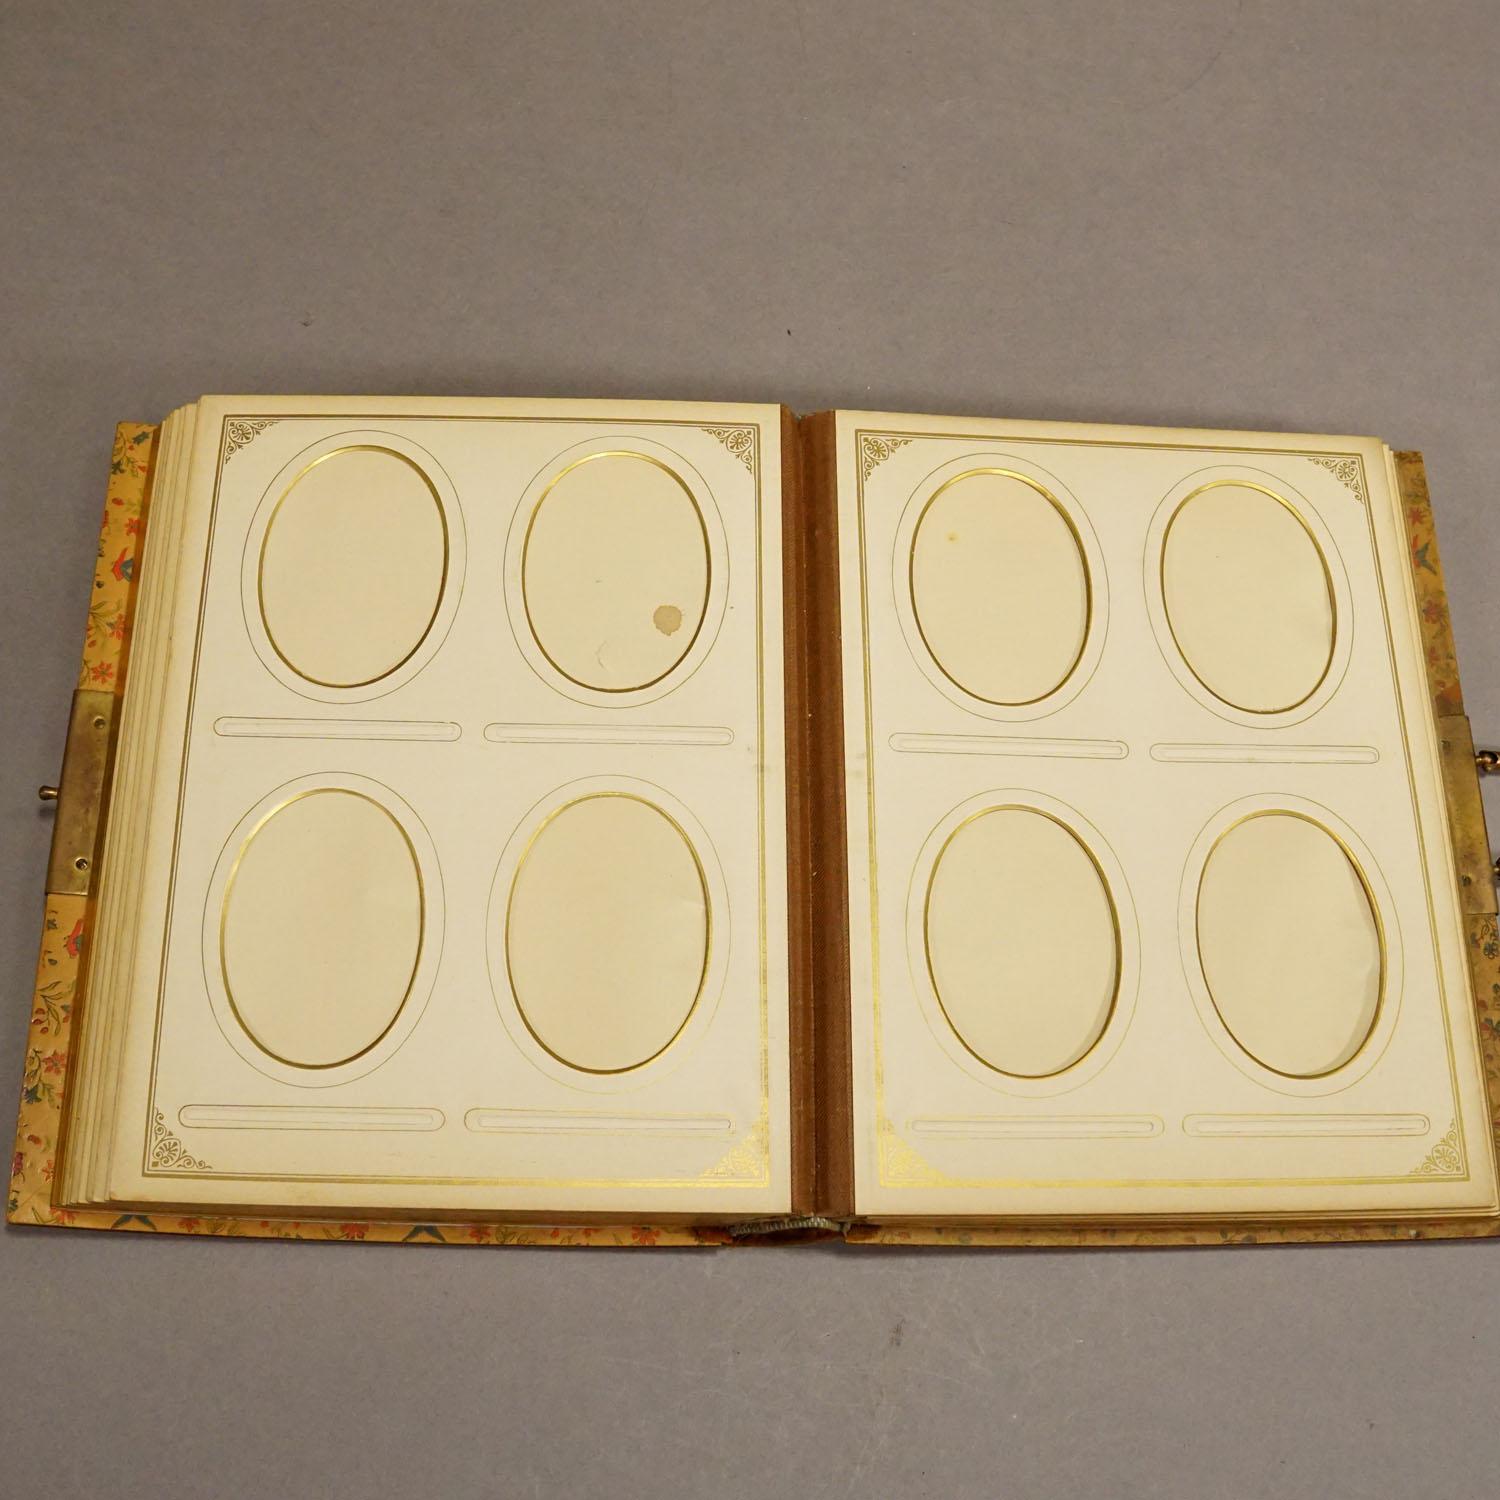 Antique Photo Album with Wooden Carved Cover, Brienz ca. 1900 For Sale 5